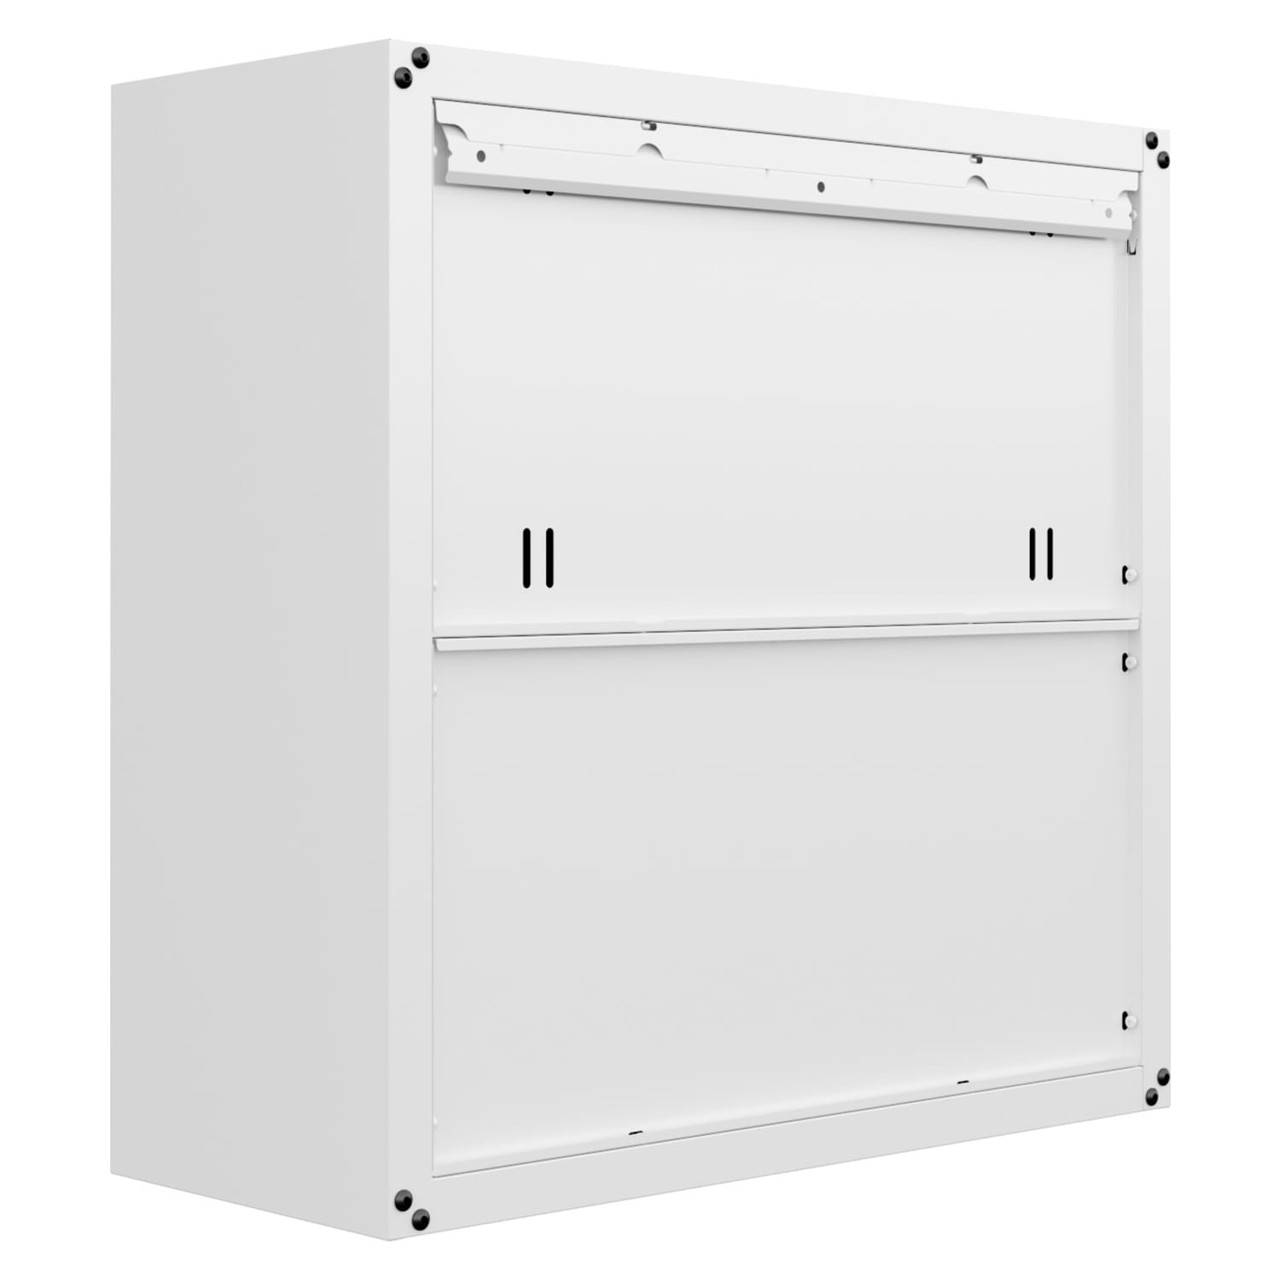 Fortress 30” Floating Textured Metal Garage Cabinet with Adjustable Shelves in White